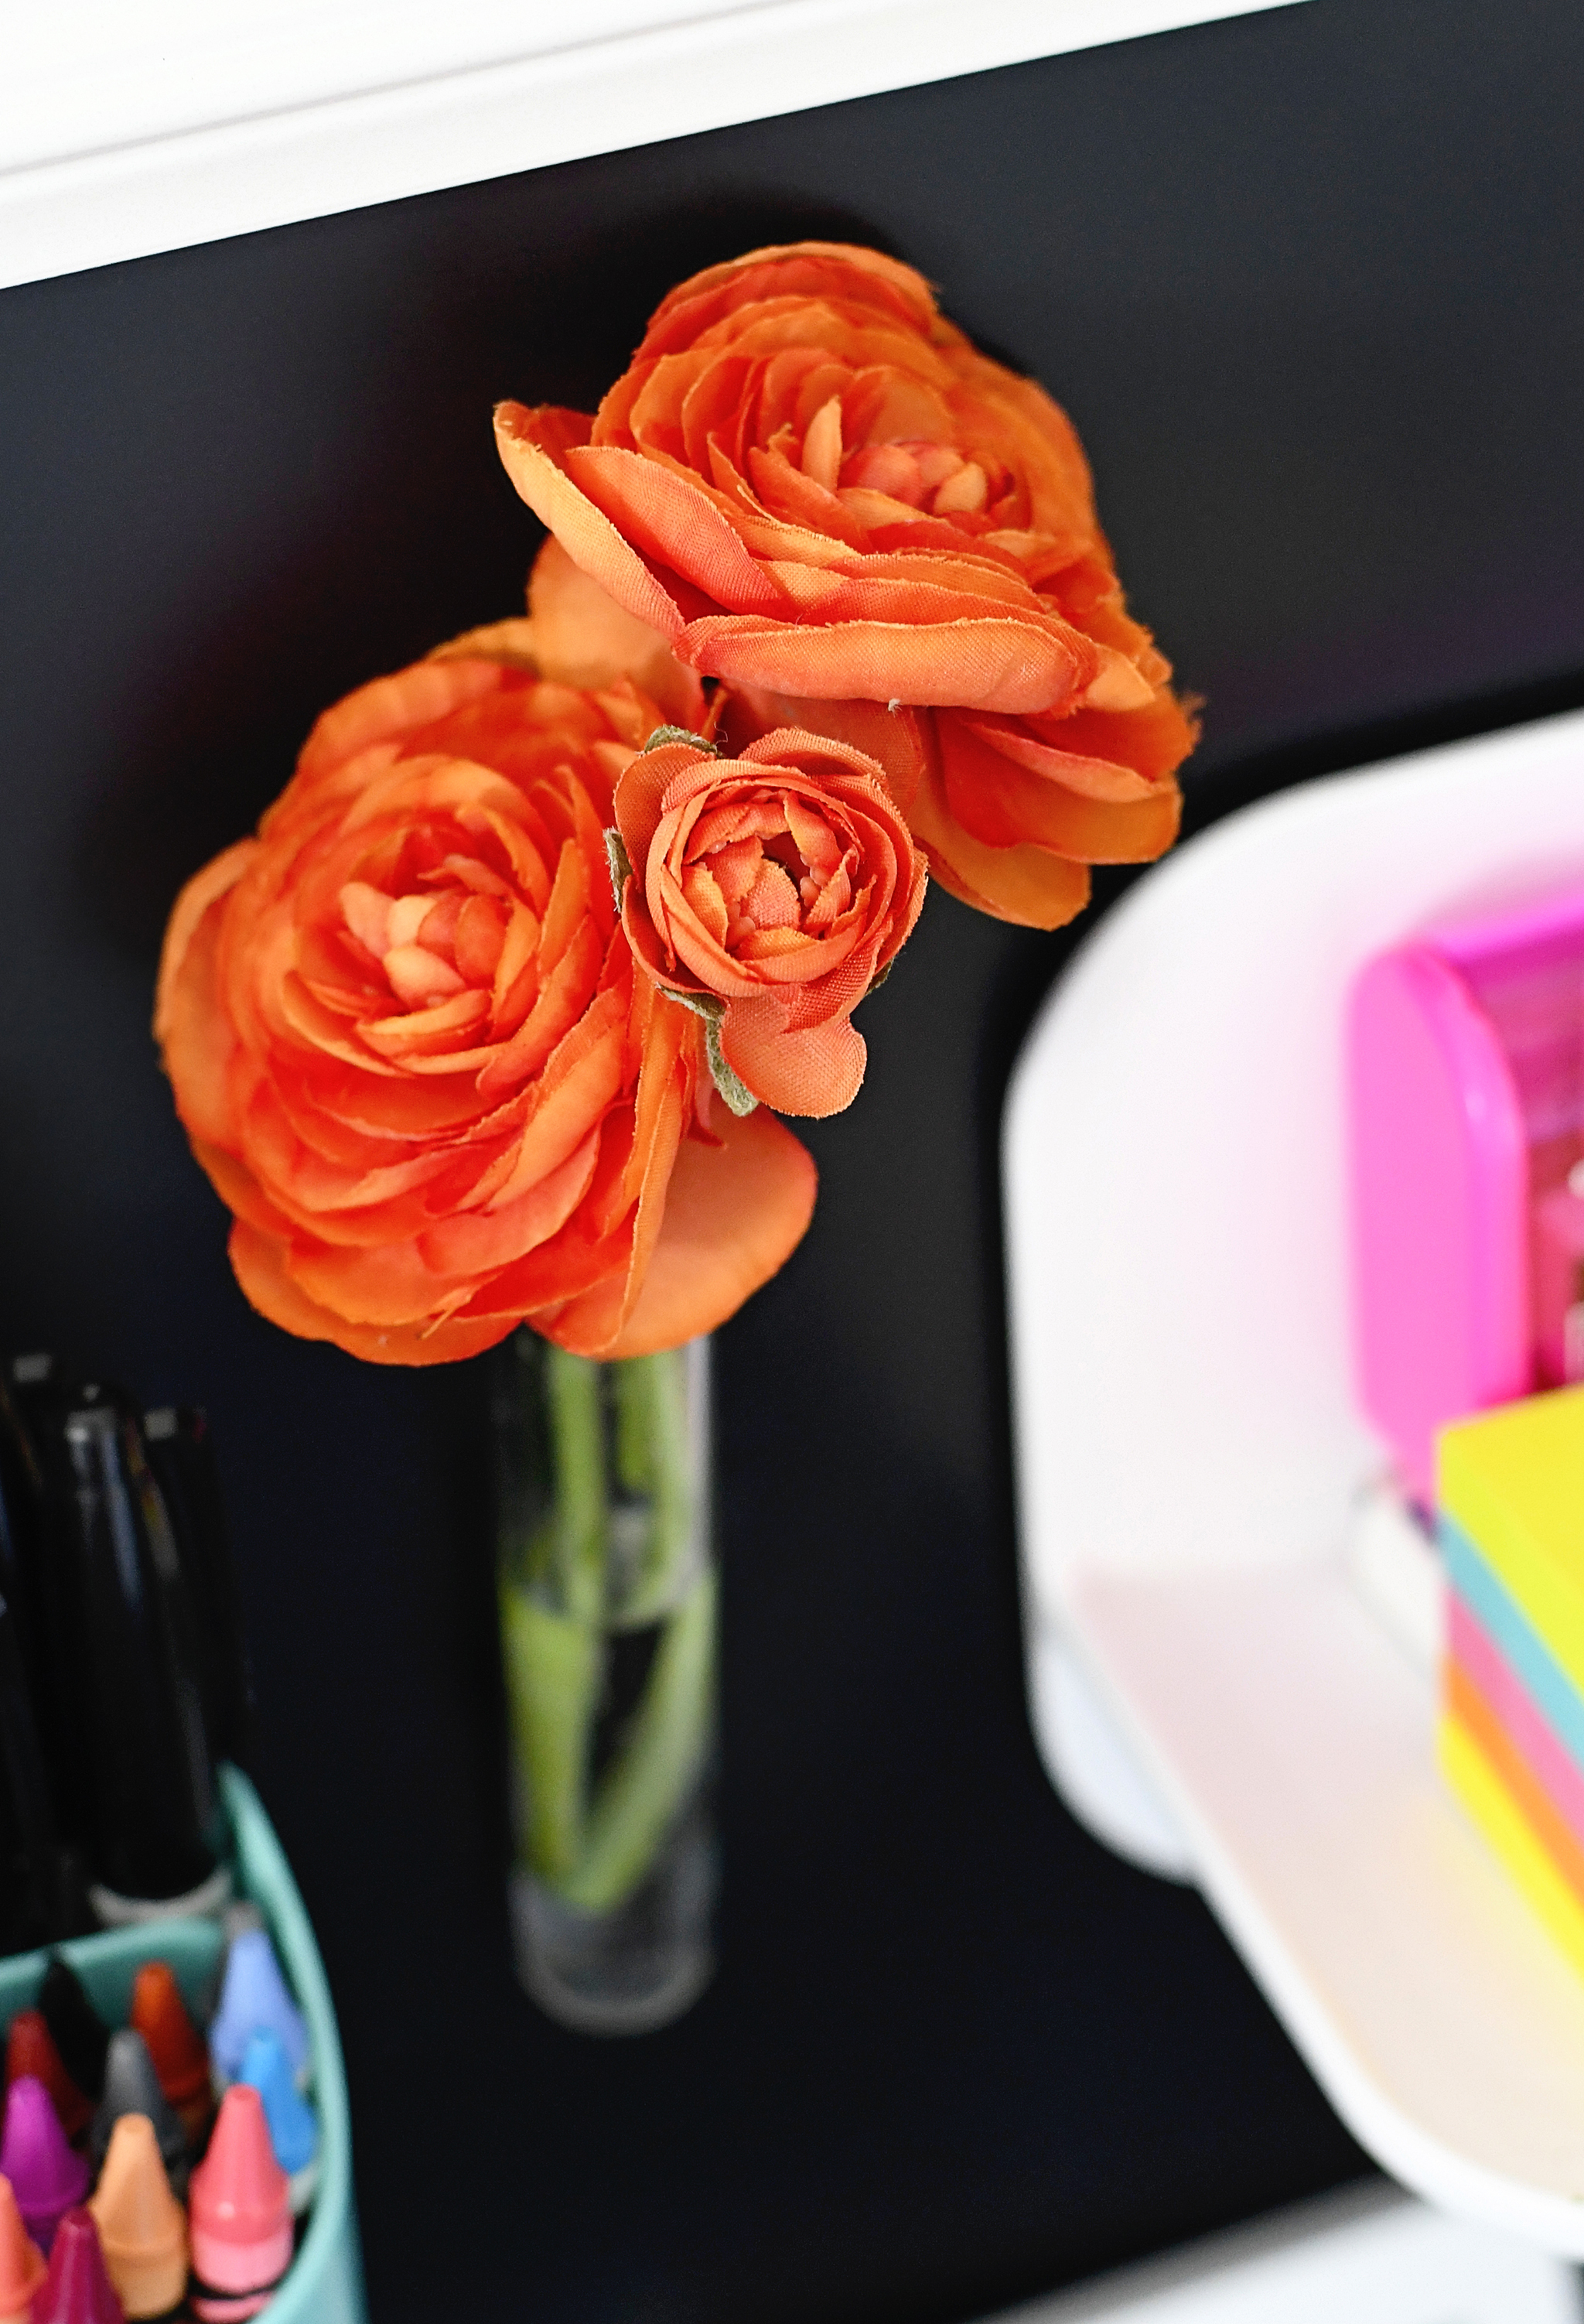 Magnetic bud vase containers add some fresh flowers to your wall!